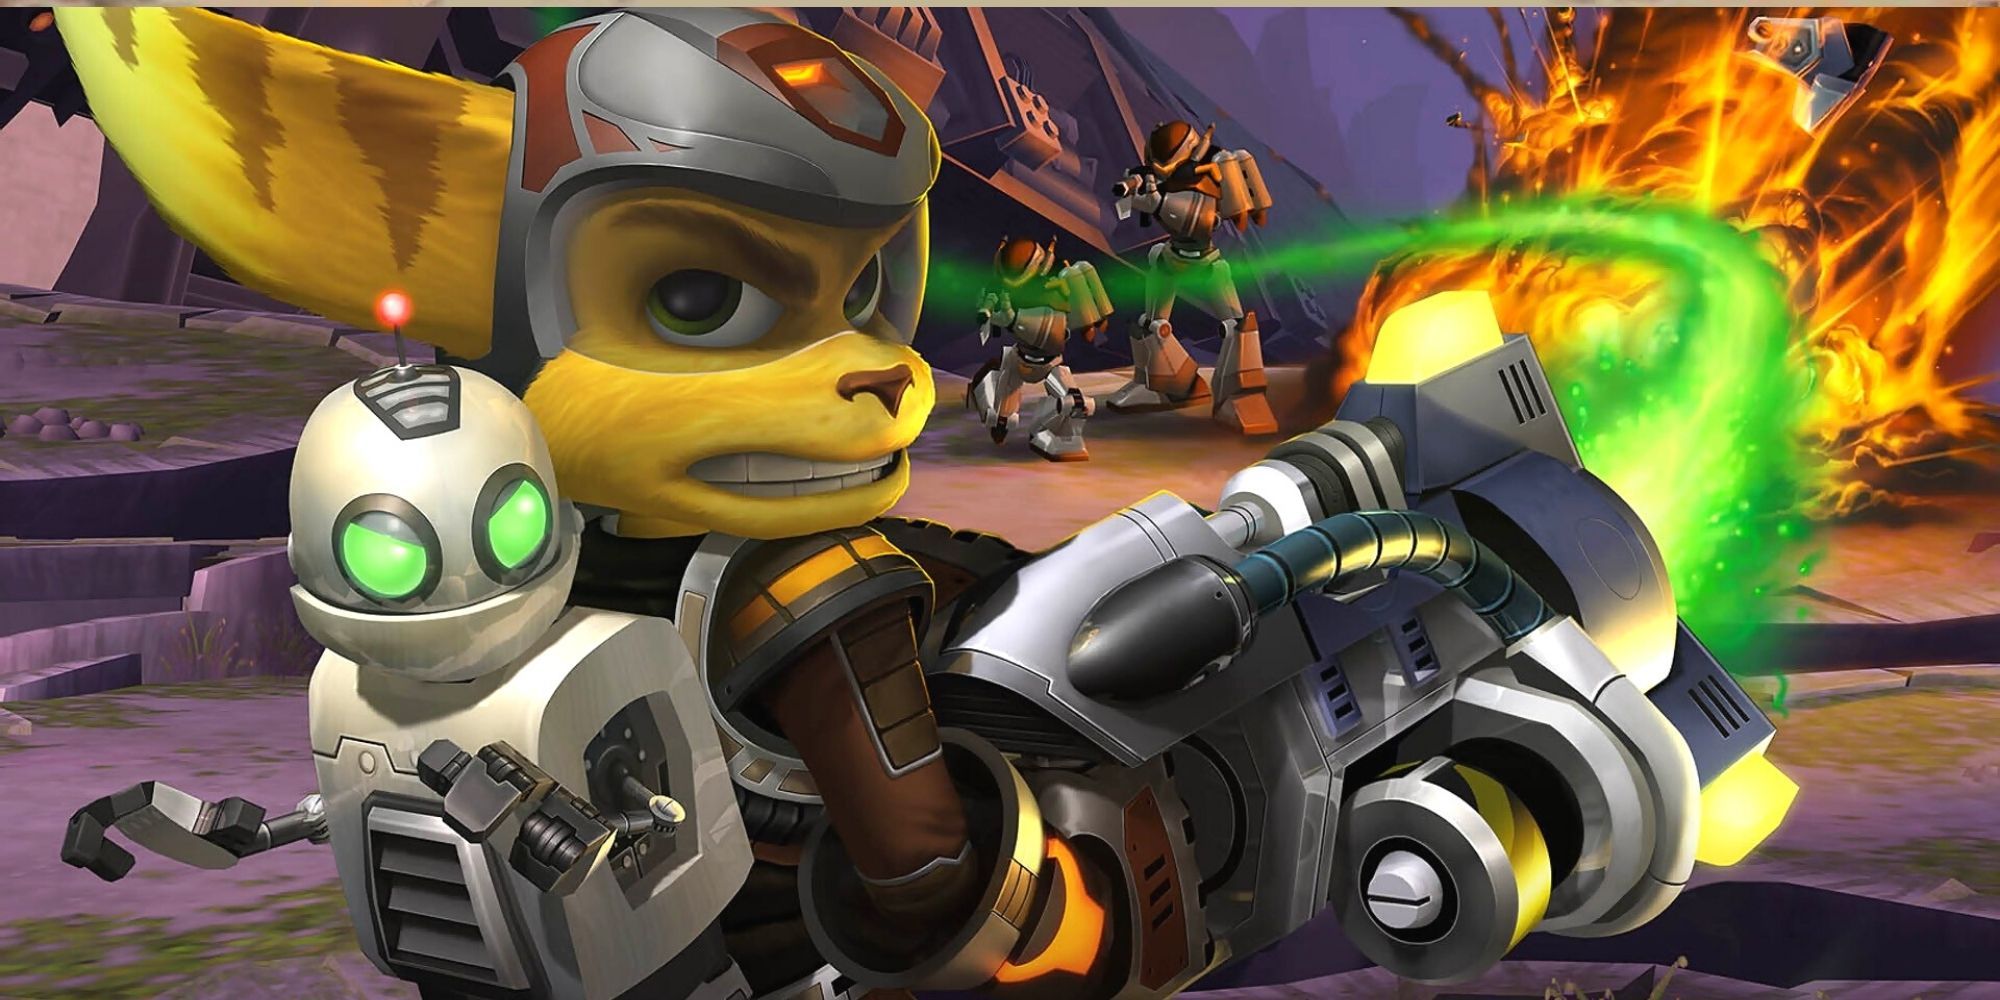 Ratchet And Clank Holding Laser Weapon Blasting Enemies